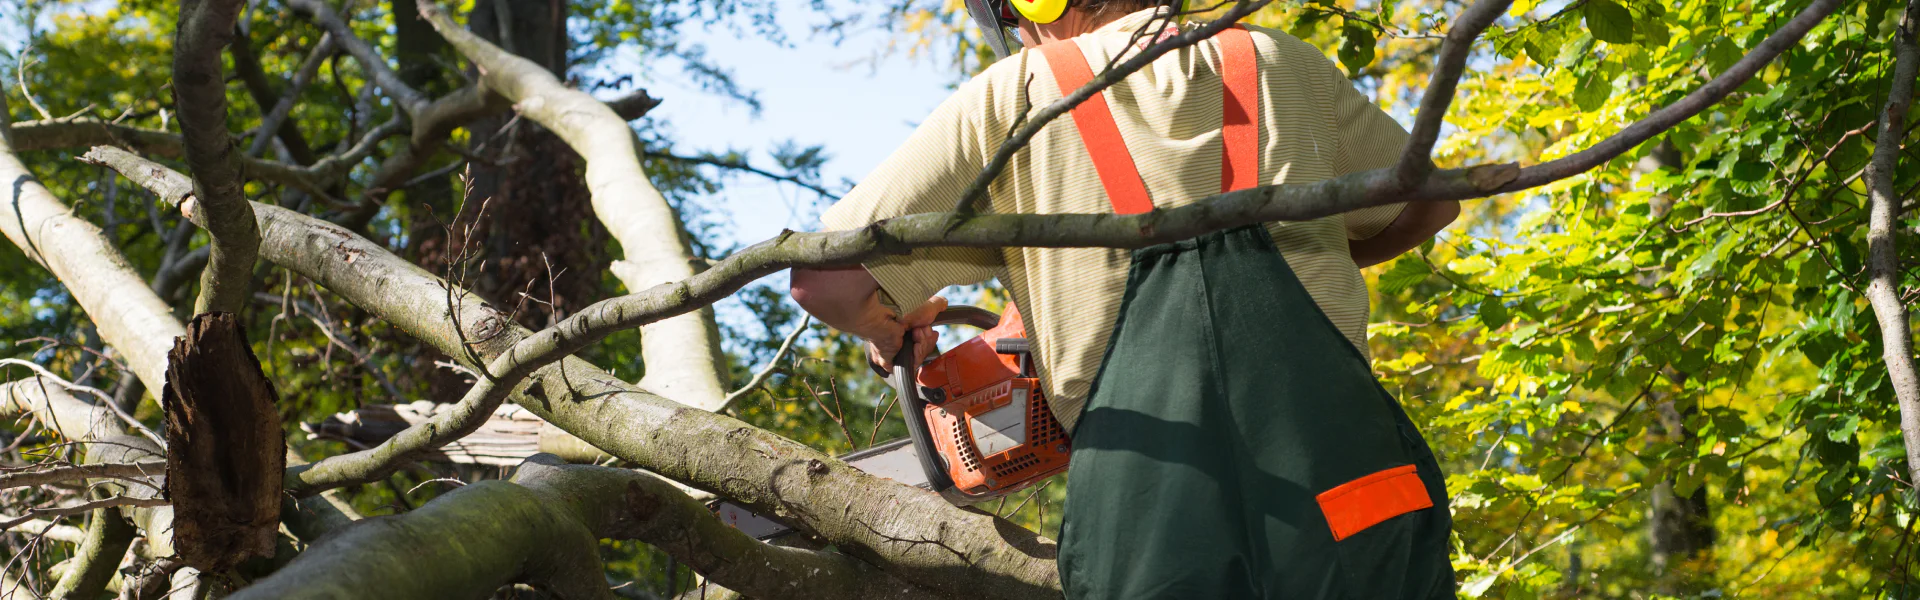 tree services contractor using a chainsaw during tree removal service shreveport la